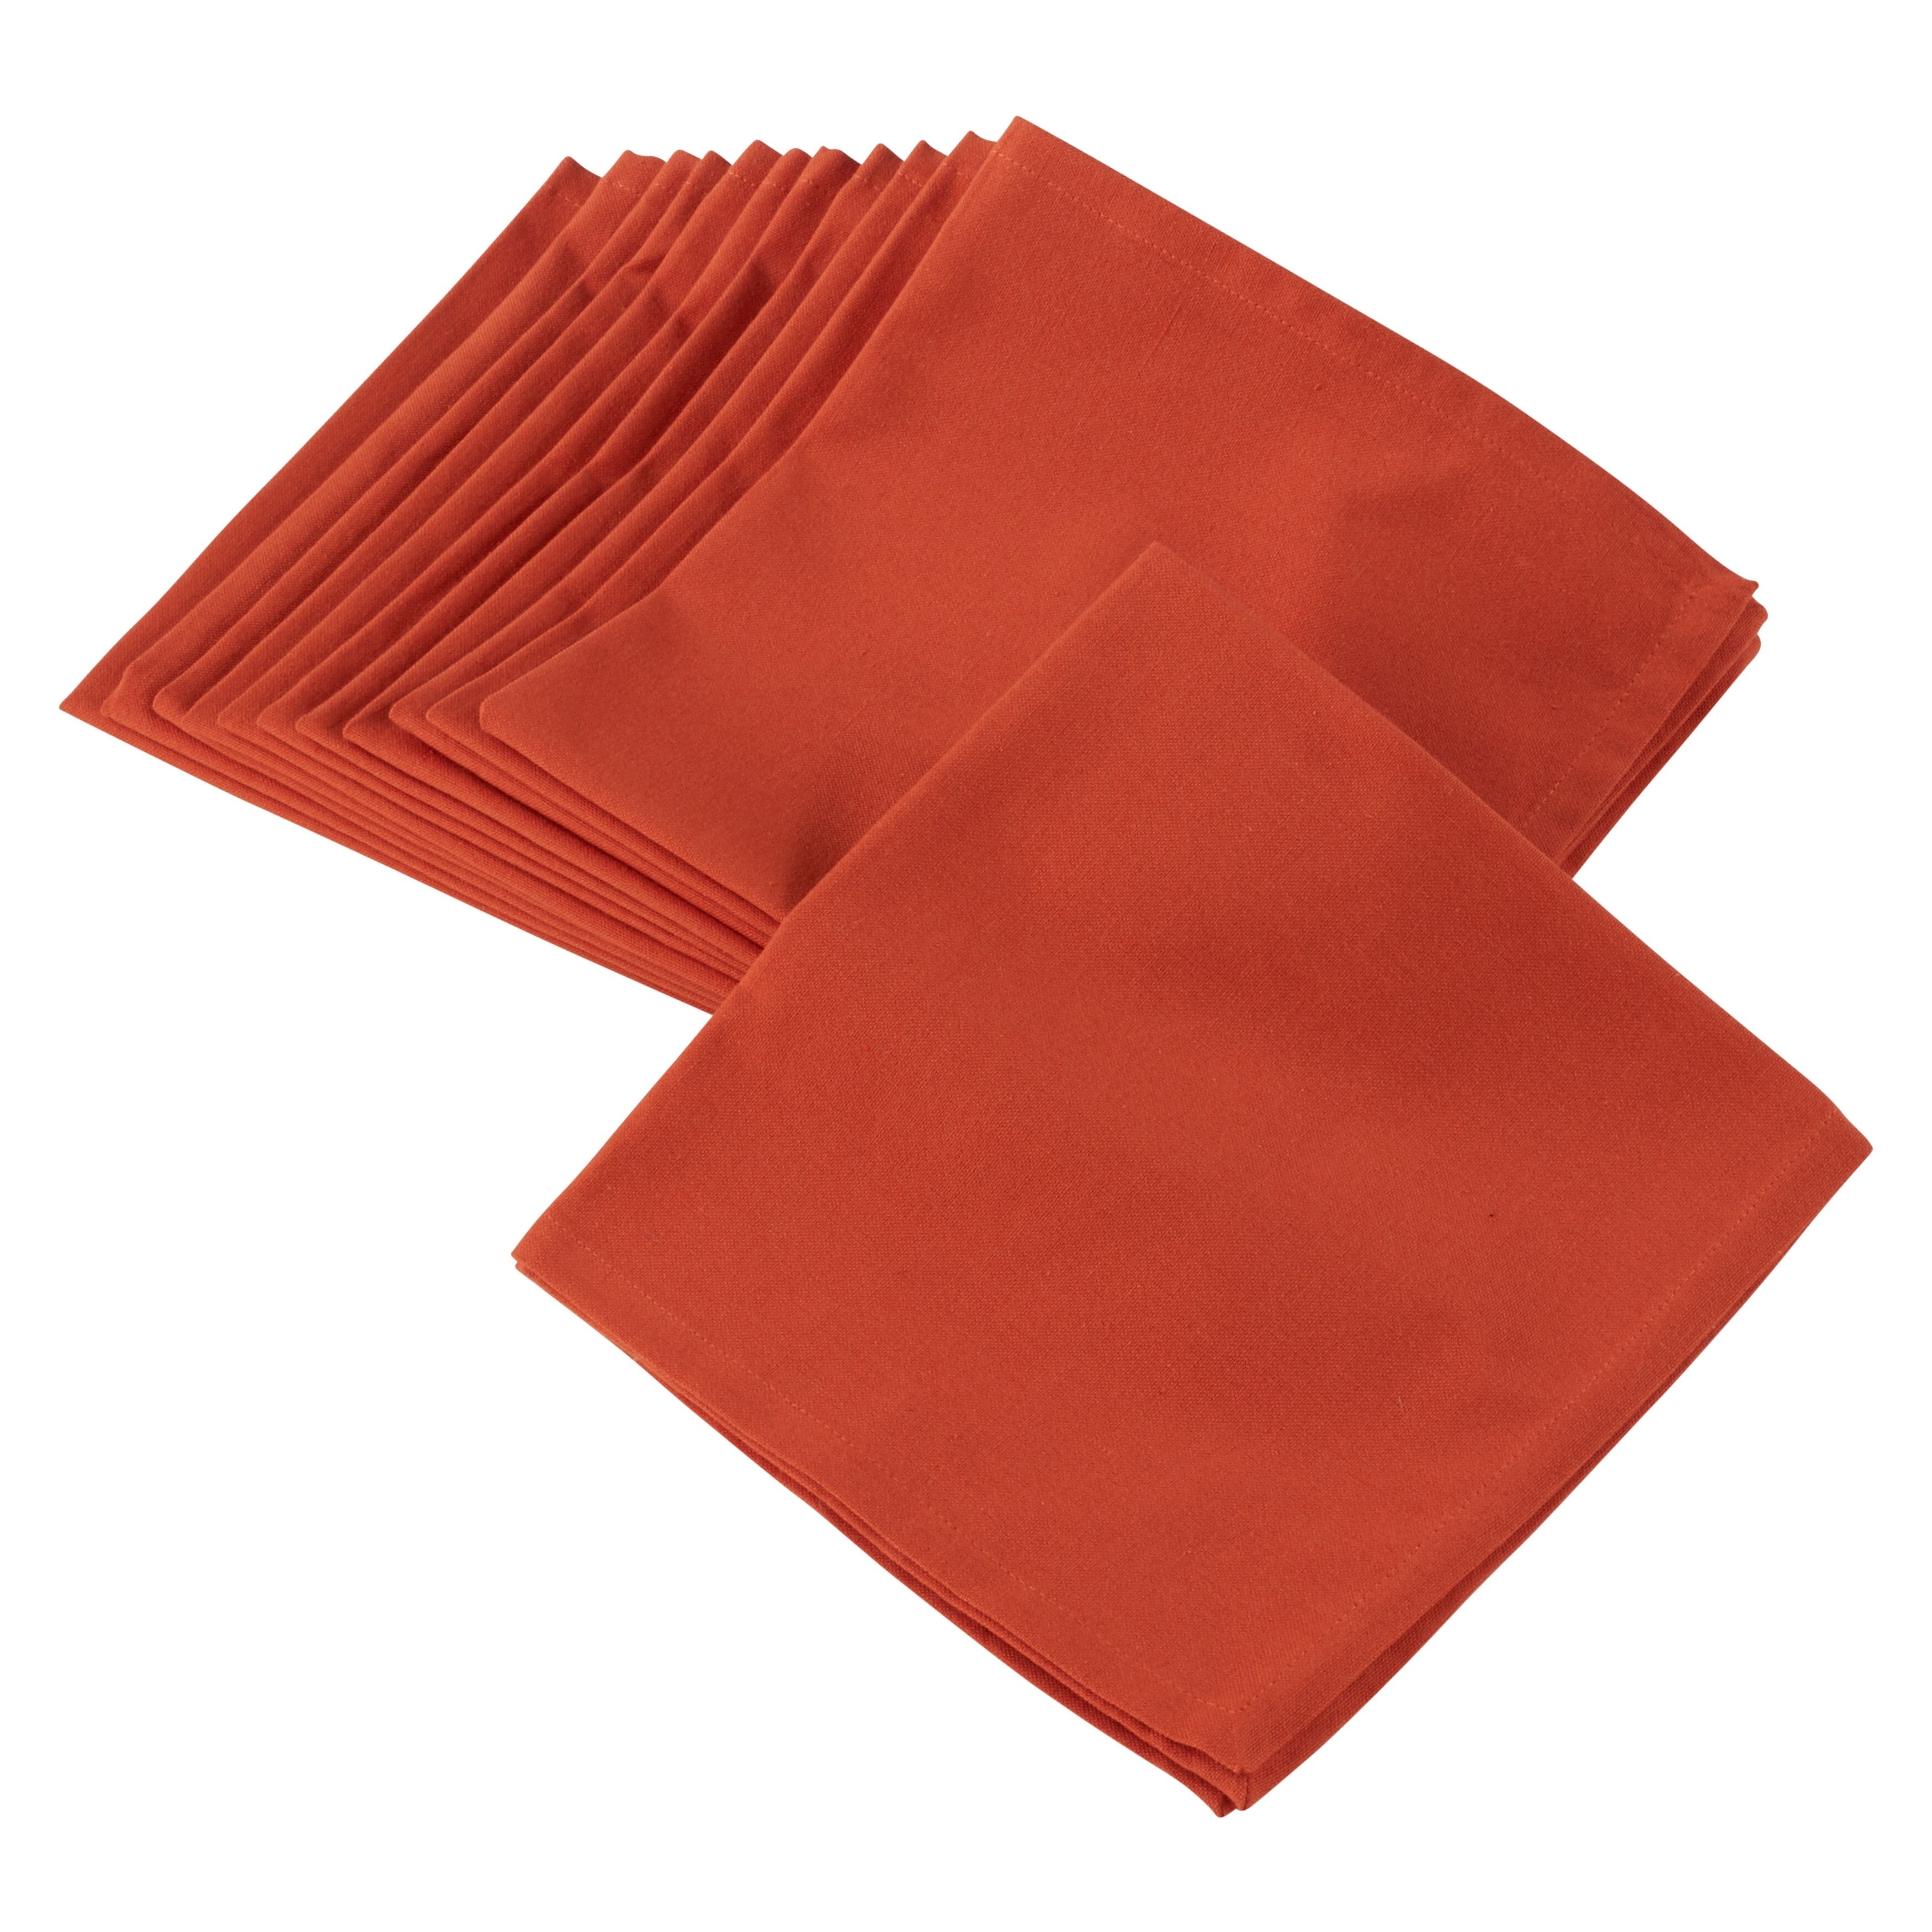 https://ak1.ostkcdn.com/images/products/22736454/100-Cotton-Square-Dinner-Napkins-In-Solid-Colors-Set-of-12-21709168-5ac3-4b67-84f5-f22954ee2760.jpg